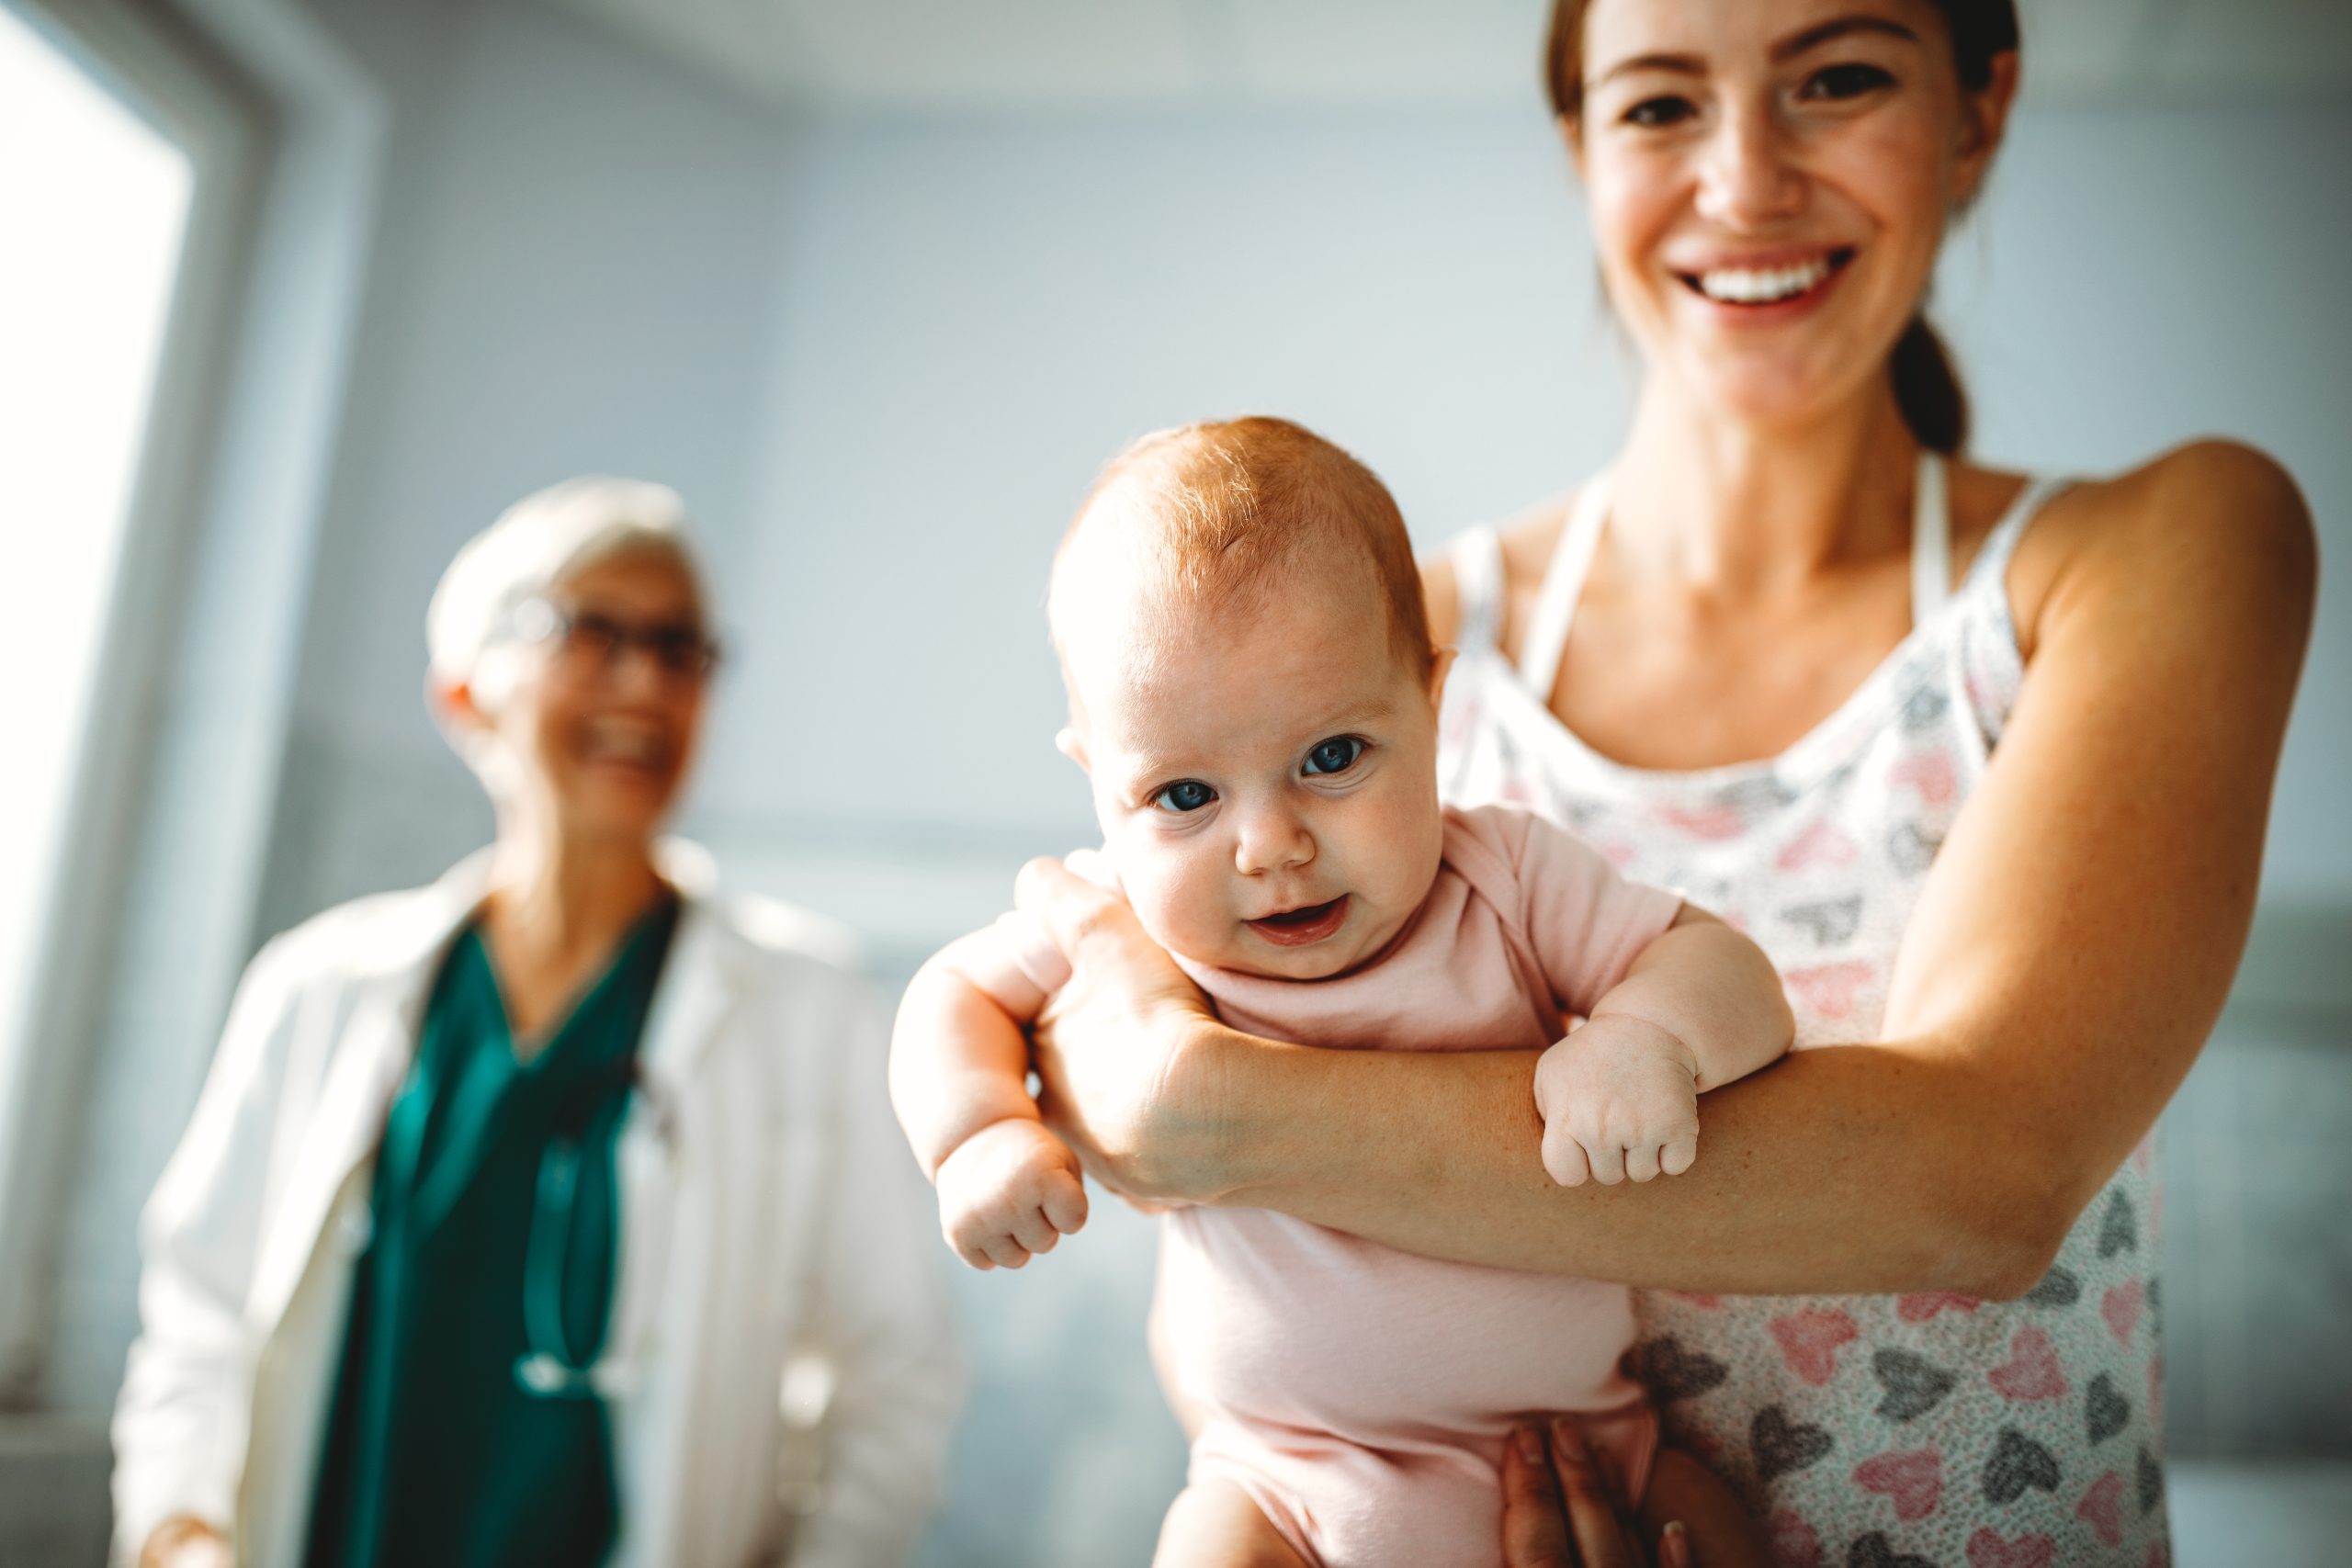 mom holding baby at doctor's office with doctor in the background